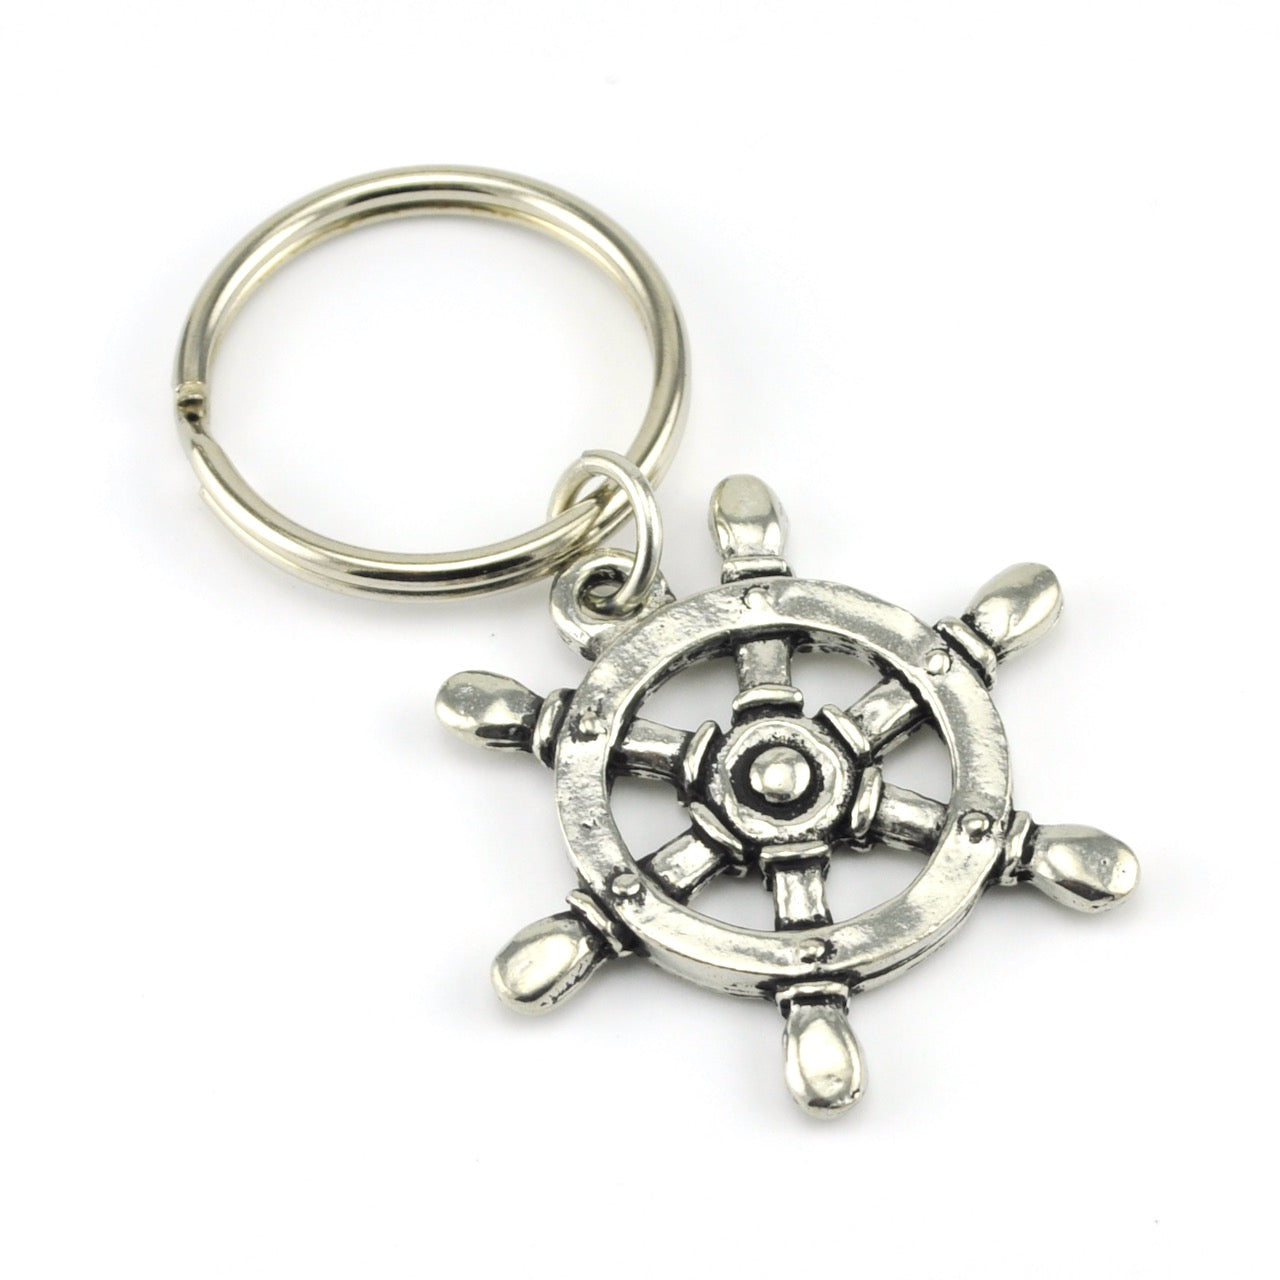 Handcrafted Pewter Captain's Wheel Key Chain